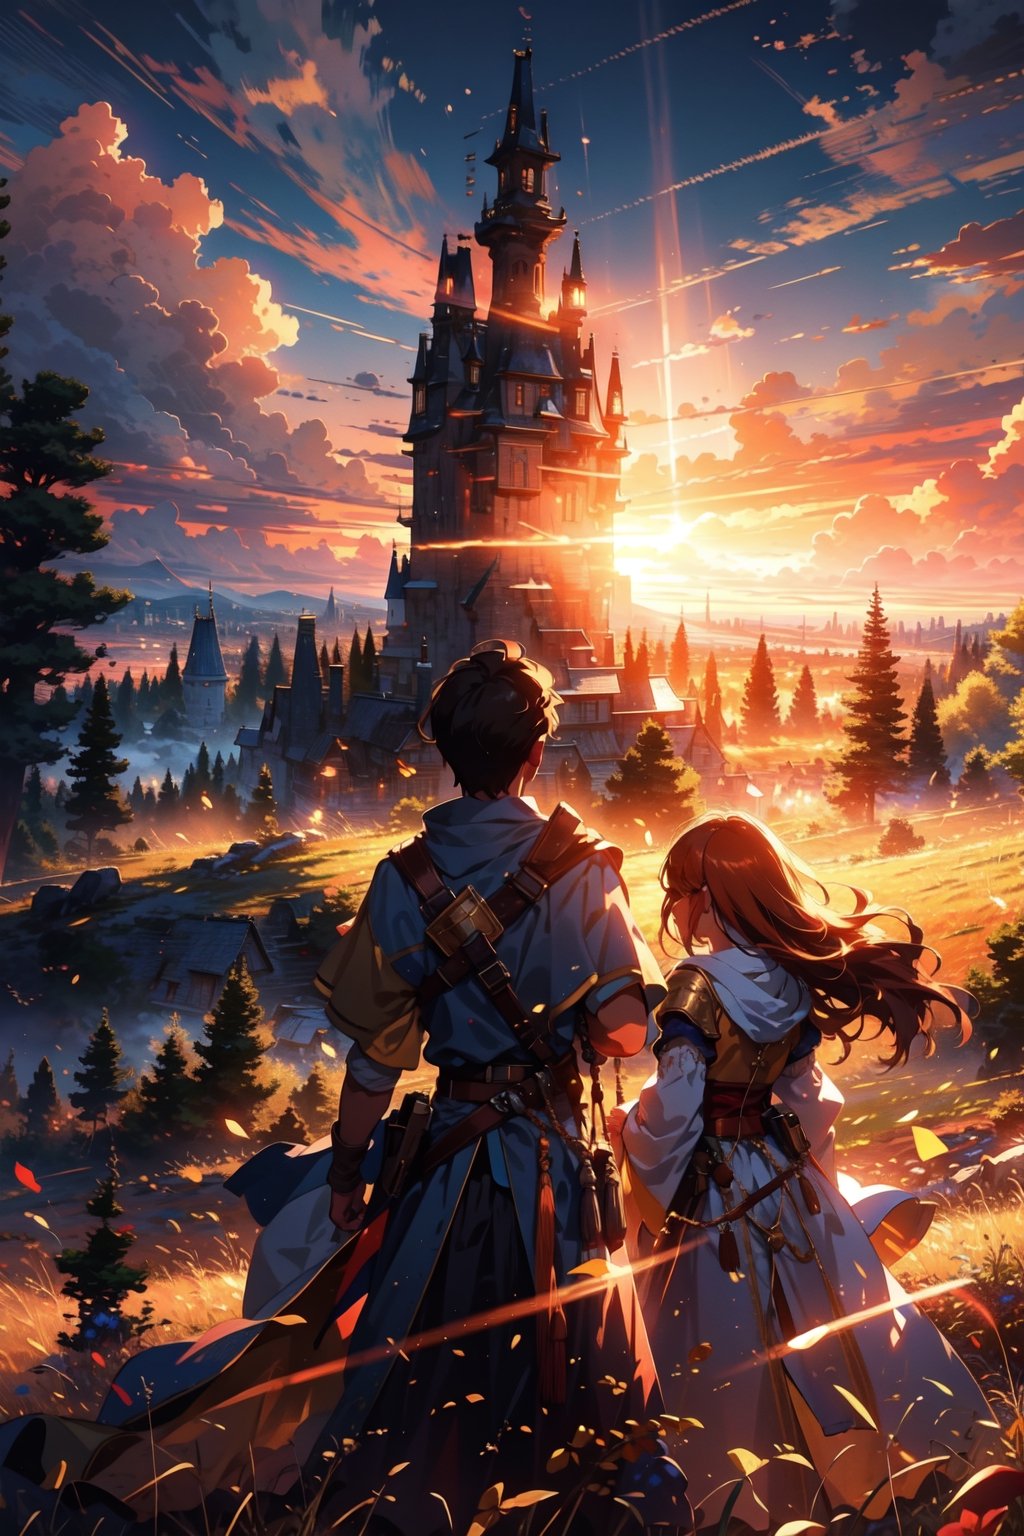 1girl, 1boy, beautiful landscape, sunset, plain, girl and boy watching at sunset, beautiful clouds, beautiful sky, detailed image, beautiful trees, stunning image, perfect use of light, ballad lighting, wind, castle in the distance, medieval aesthetics 